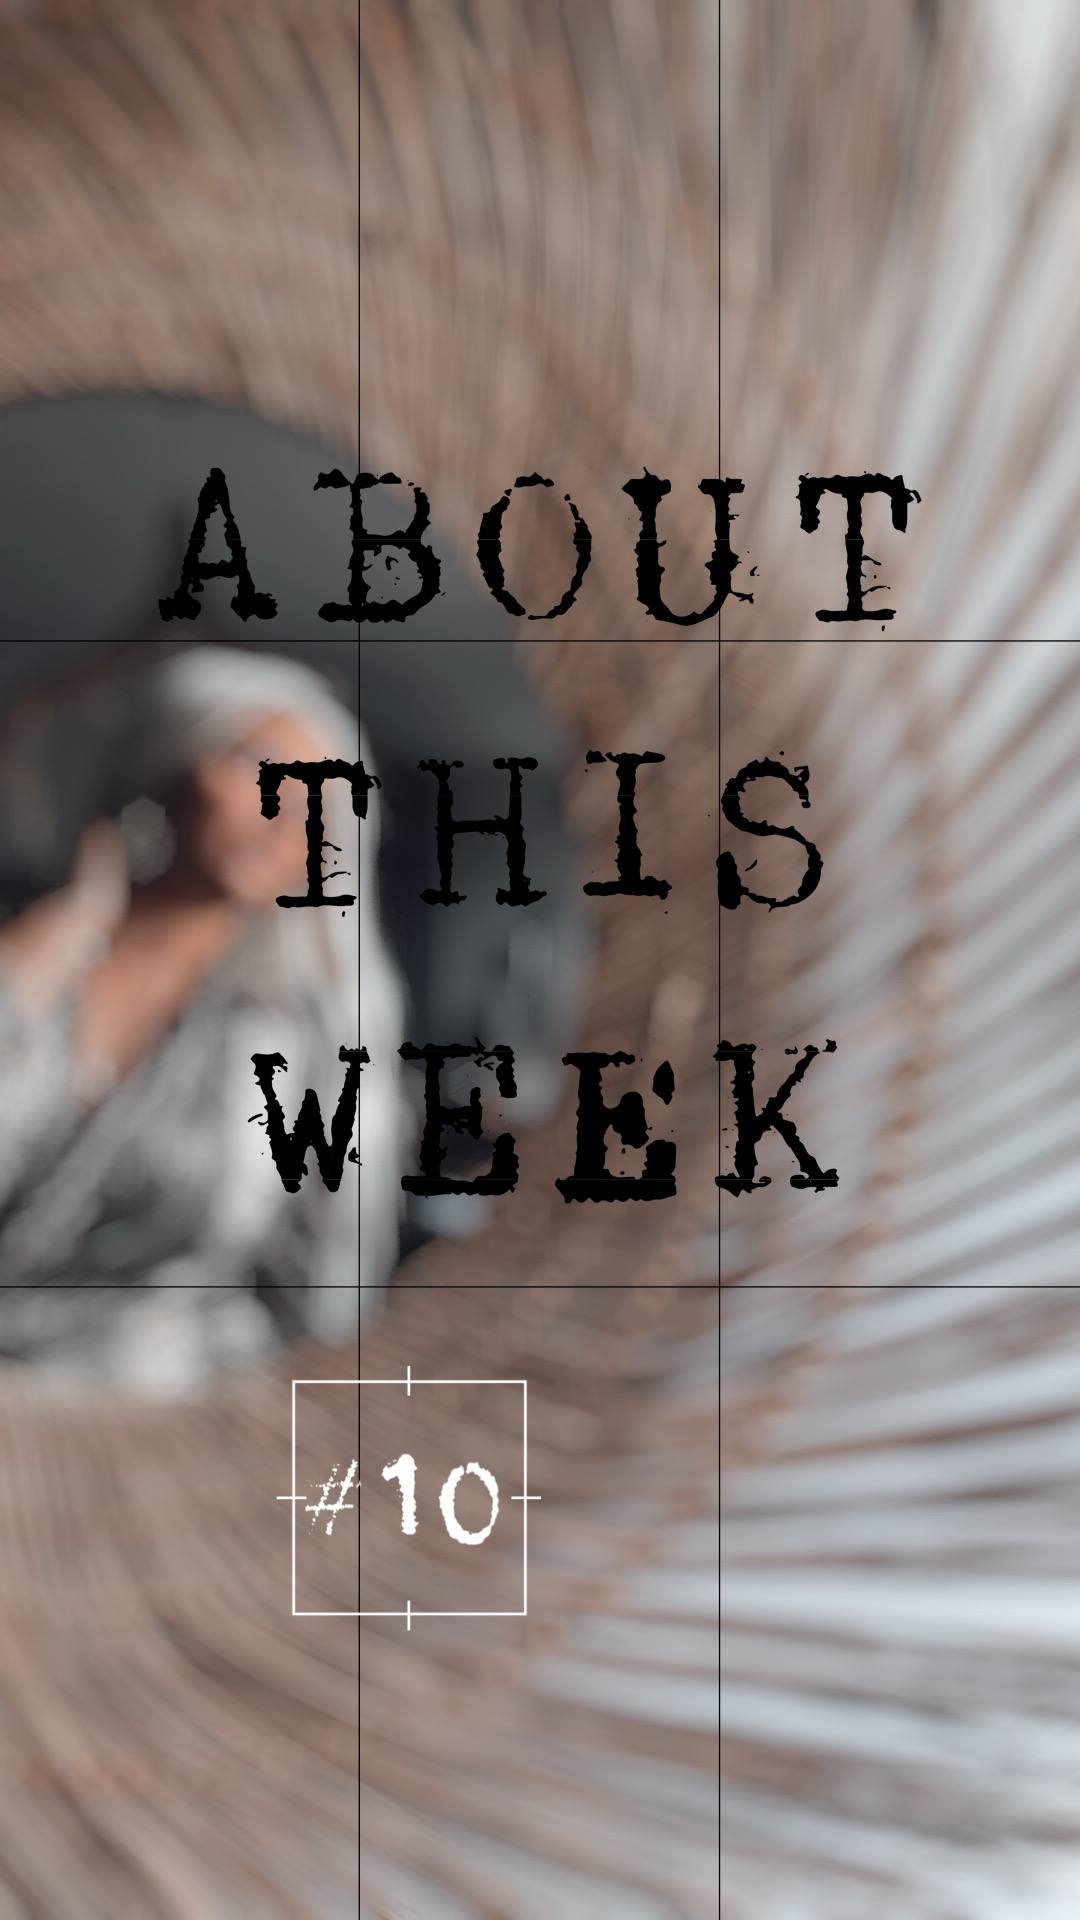 About this week #10